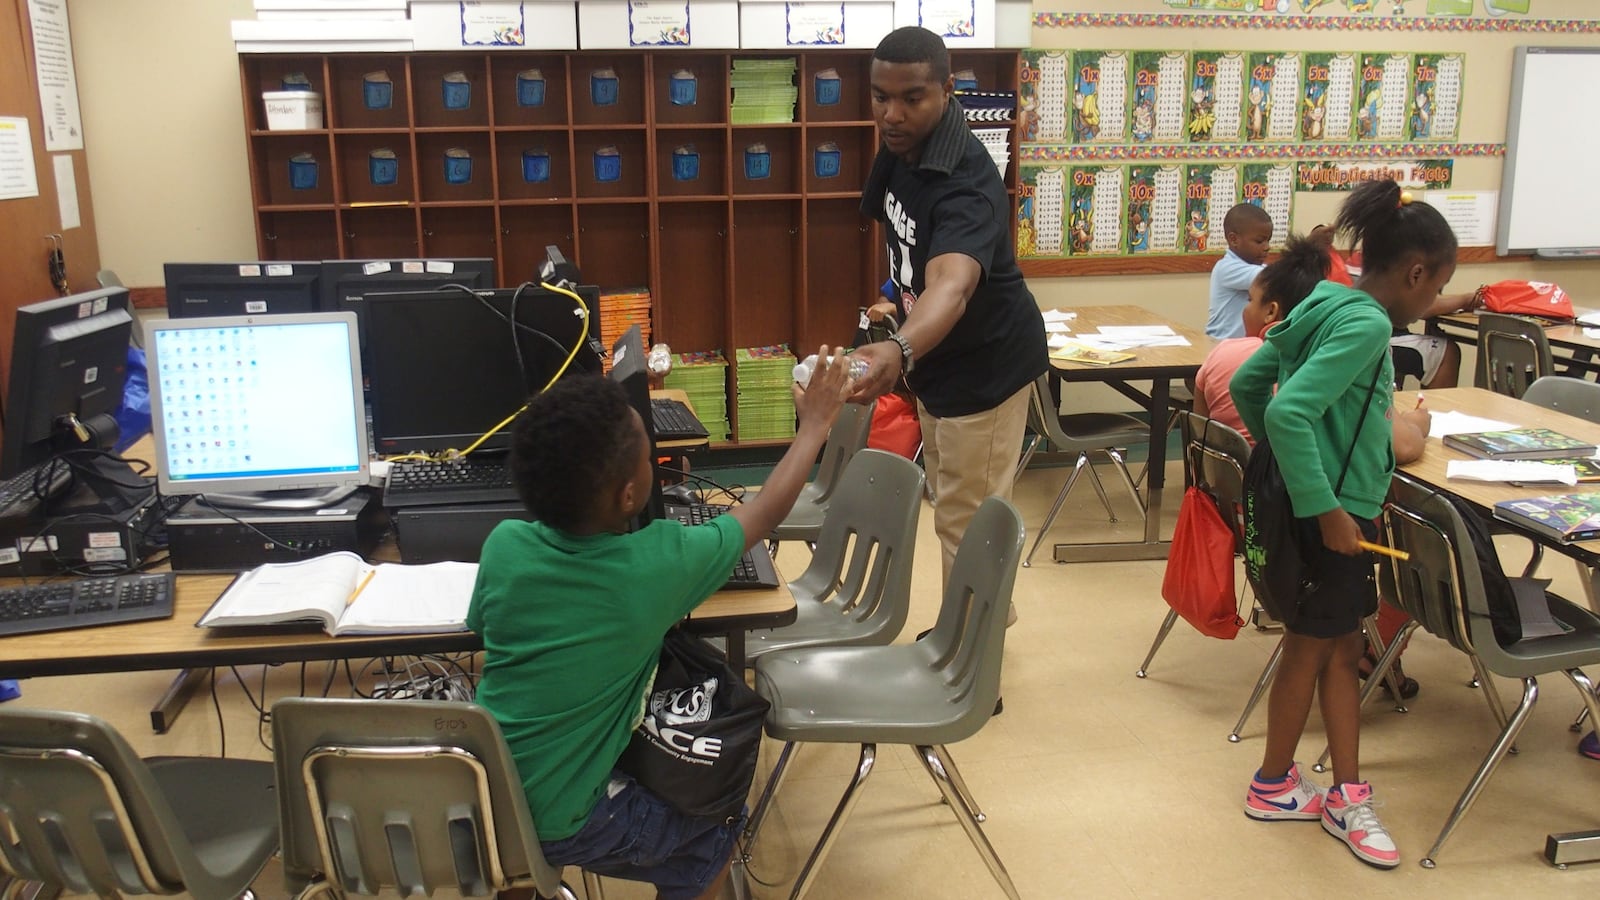 An engagement team member for Shelby County Schools hands out packets filled with reading books and district paraphernalia to children during a summer school program at Winridge Elementary School in Memphis.